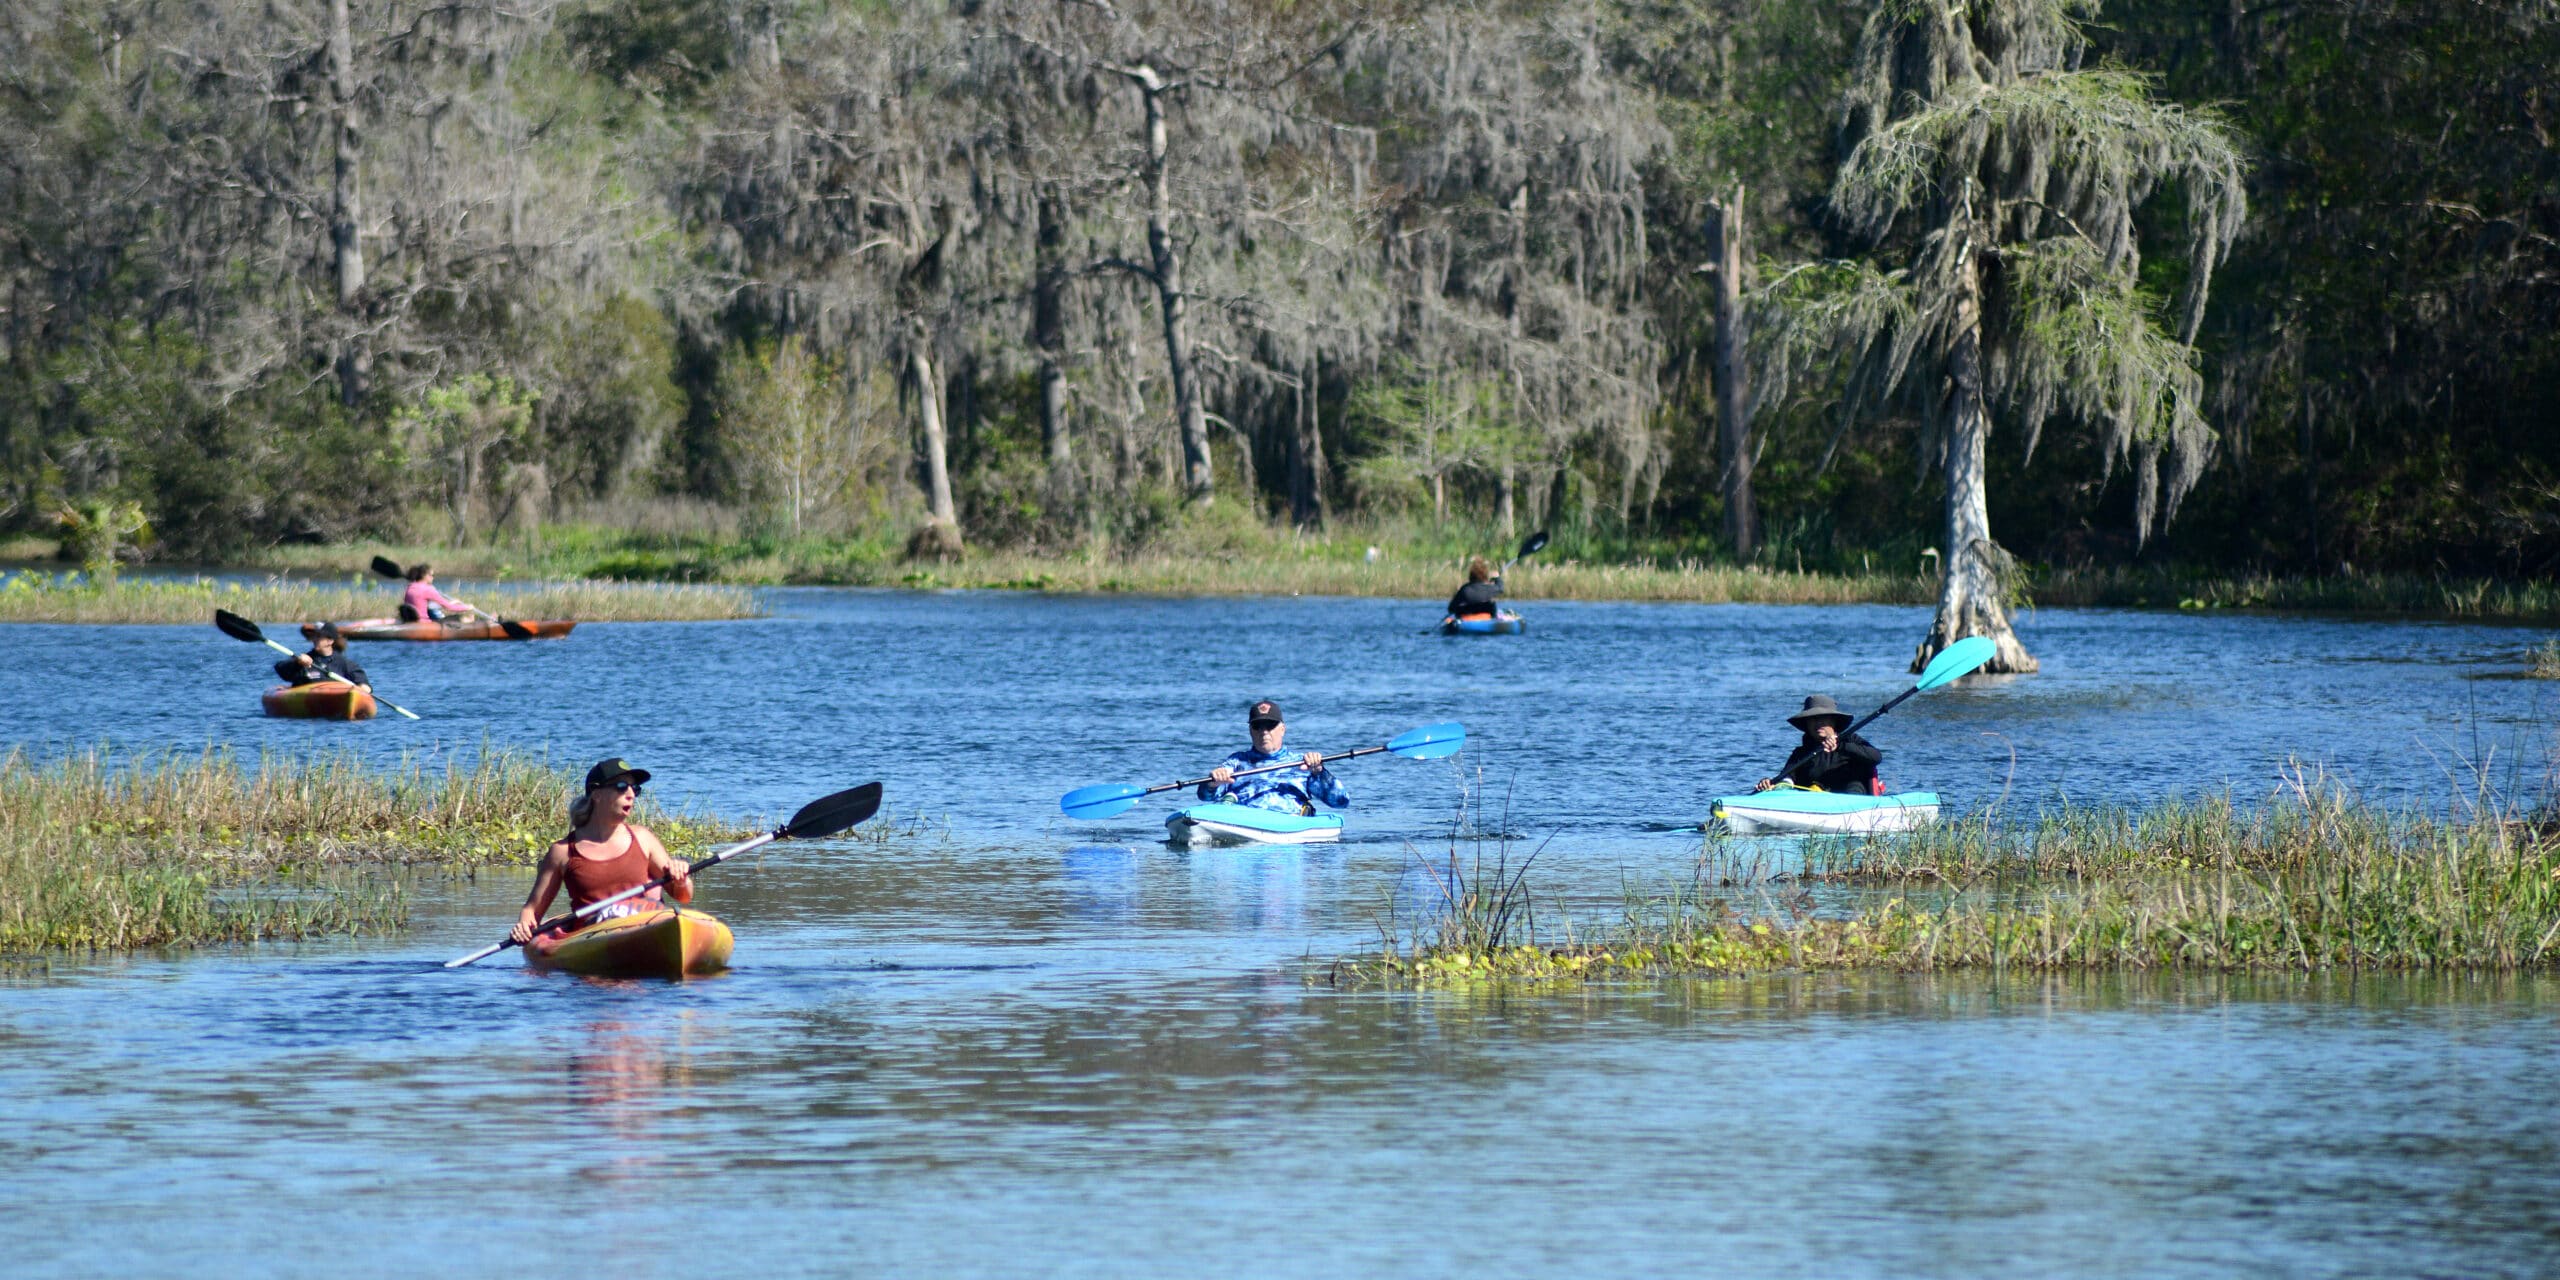 People paddling on the Rainbow River in Dunnellon Florida.